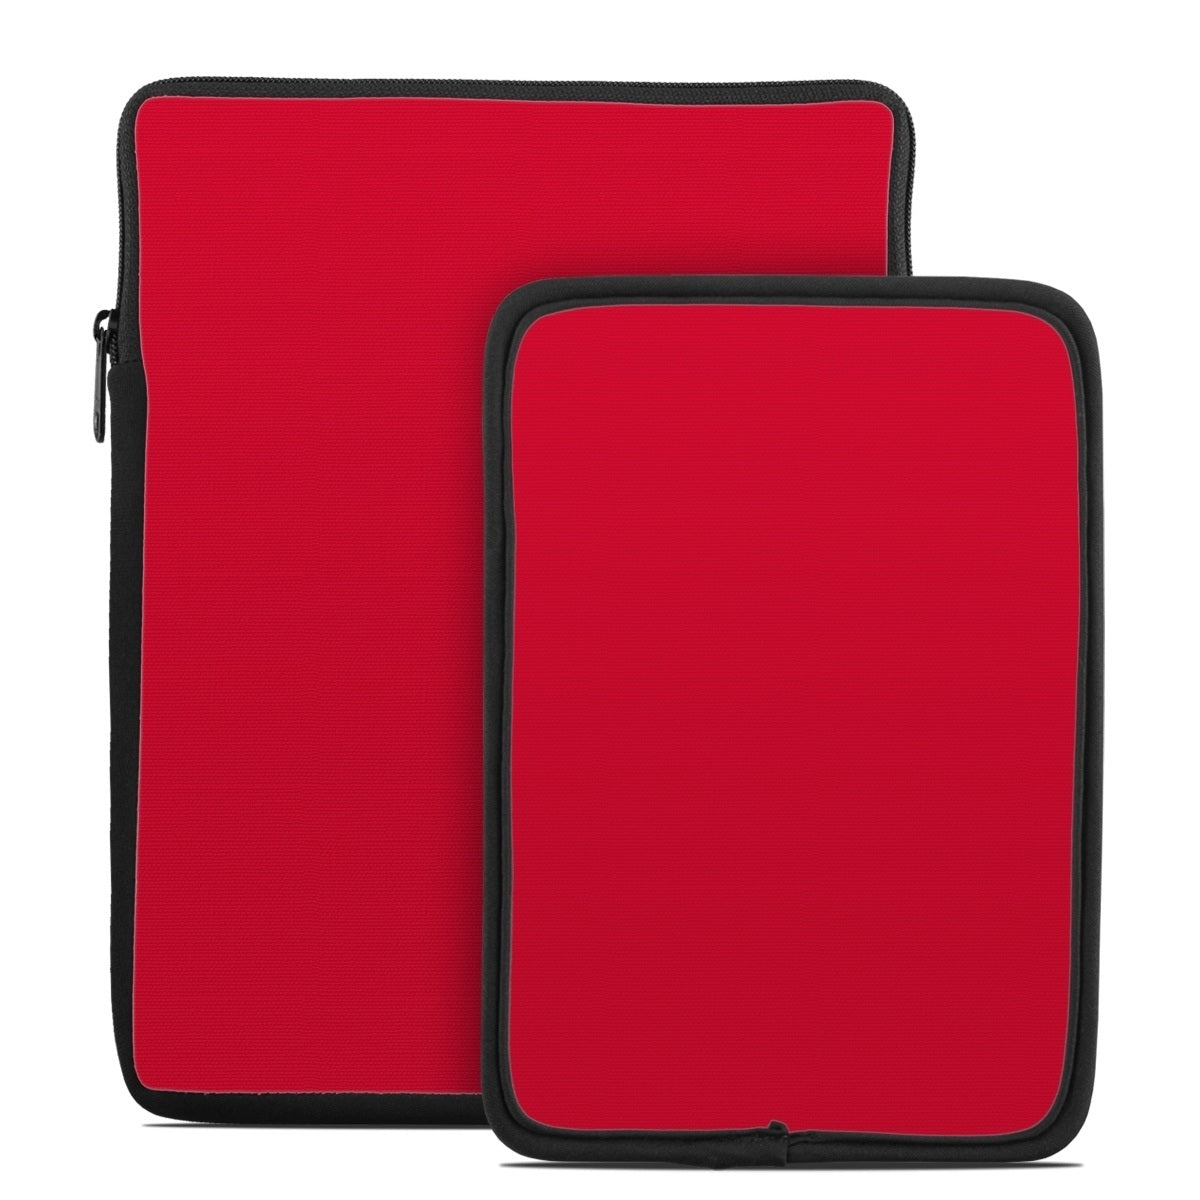 Solid State Red - Tablet Sleeve